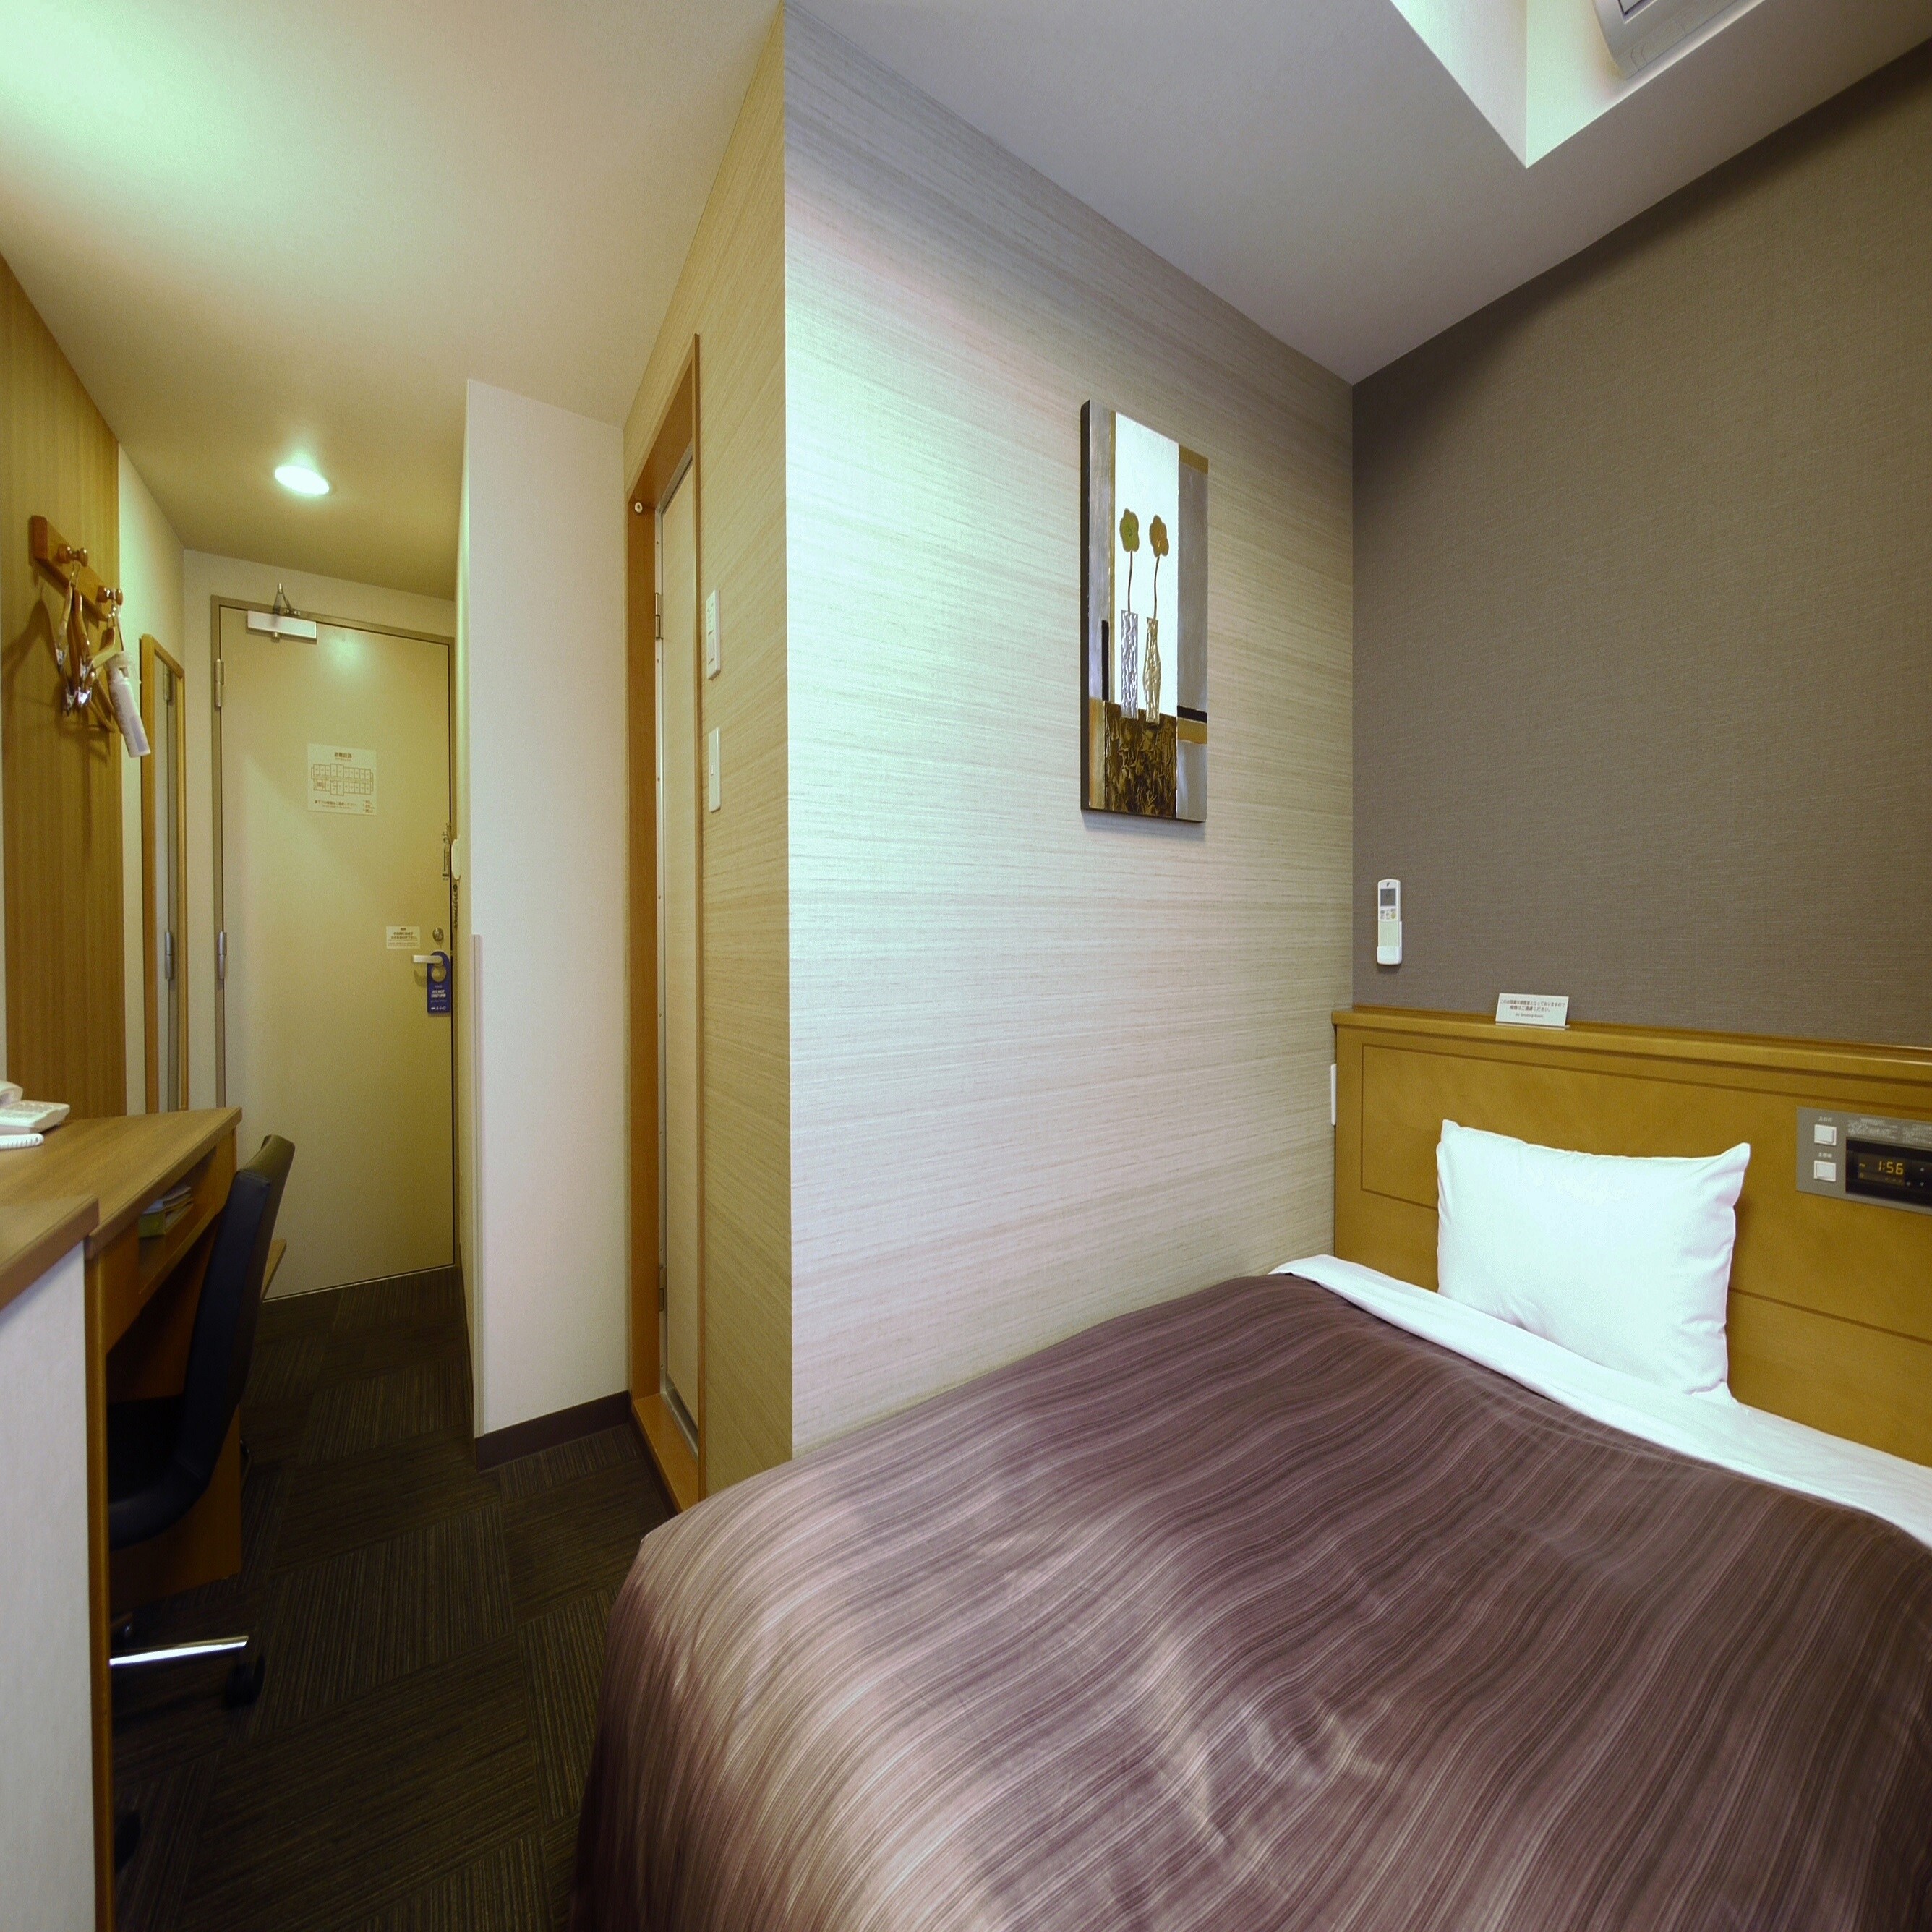 ■ Single room A type ■ A room that is a little more compact than the standard. You can stay at a good price